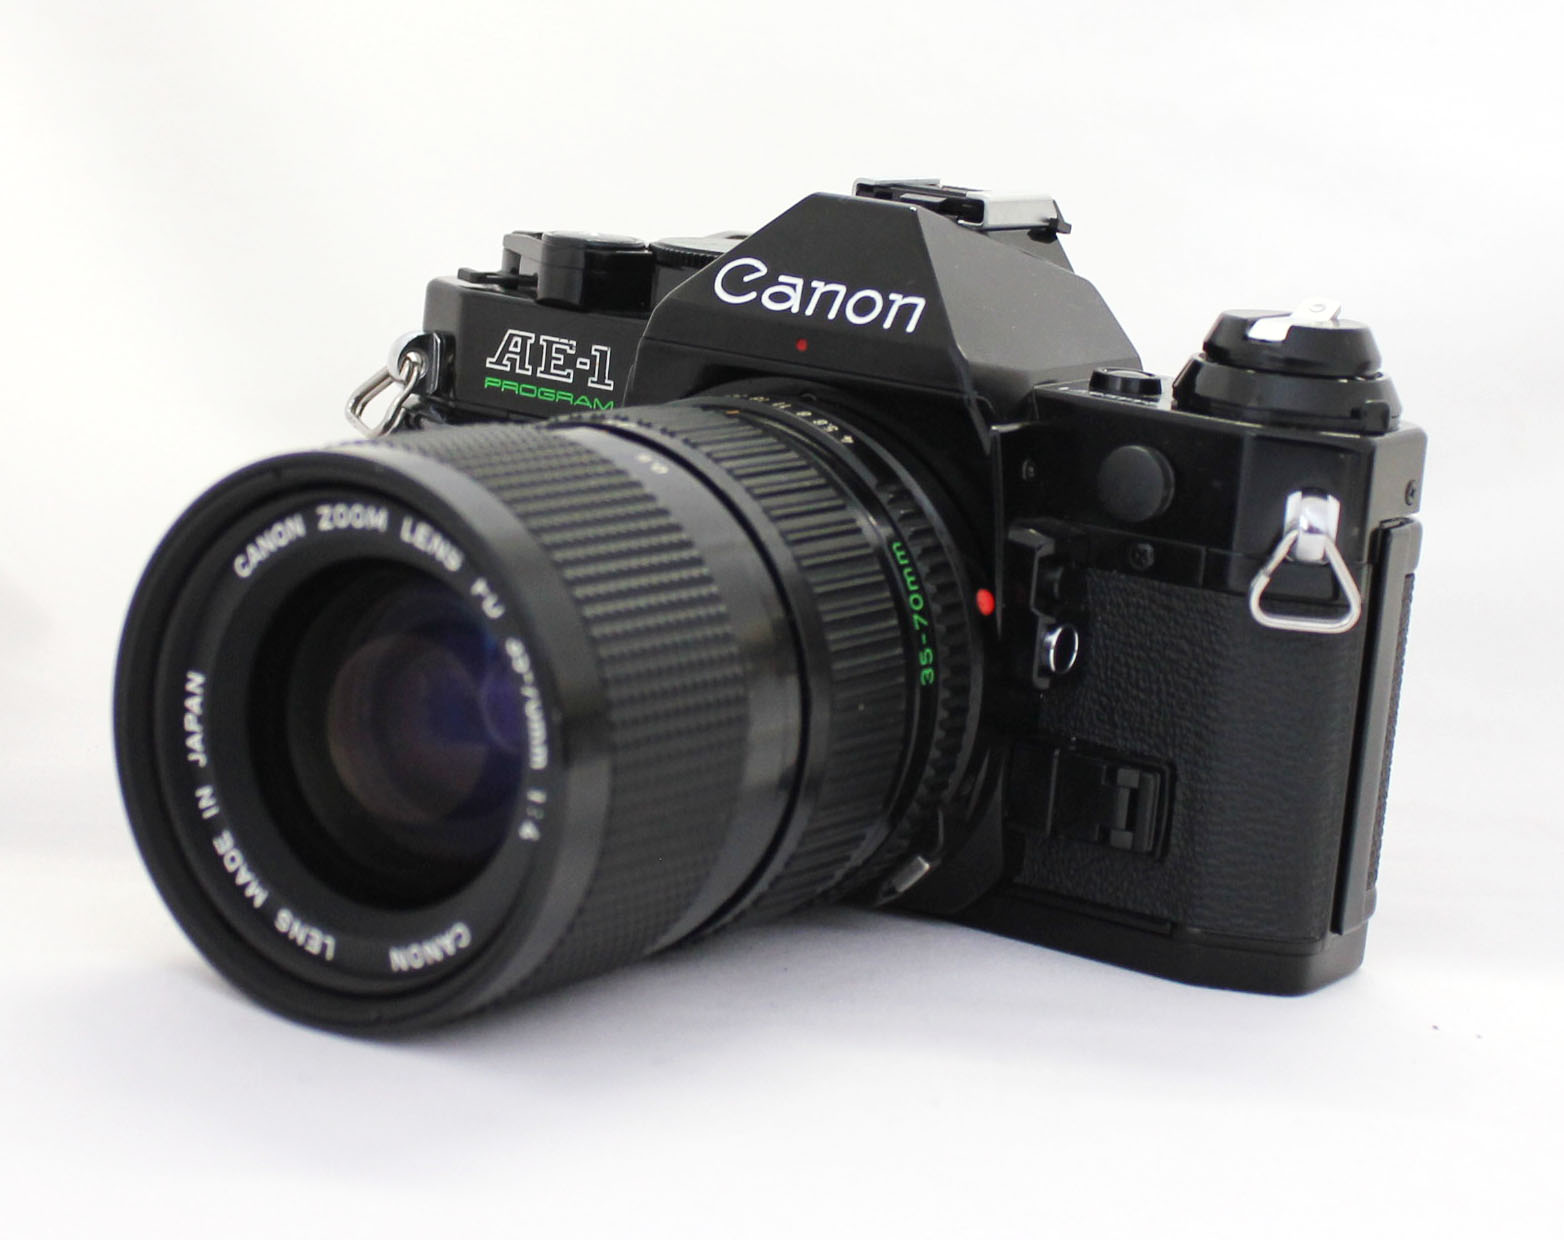 Japan Used Camera Shop | [Exc+++++] Canon AE-1 Program 35mm SLR Film Camera Black with New FD 35-70mm F/4 Lens from Japan